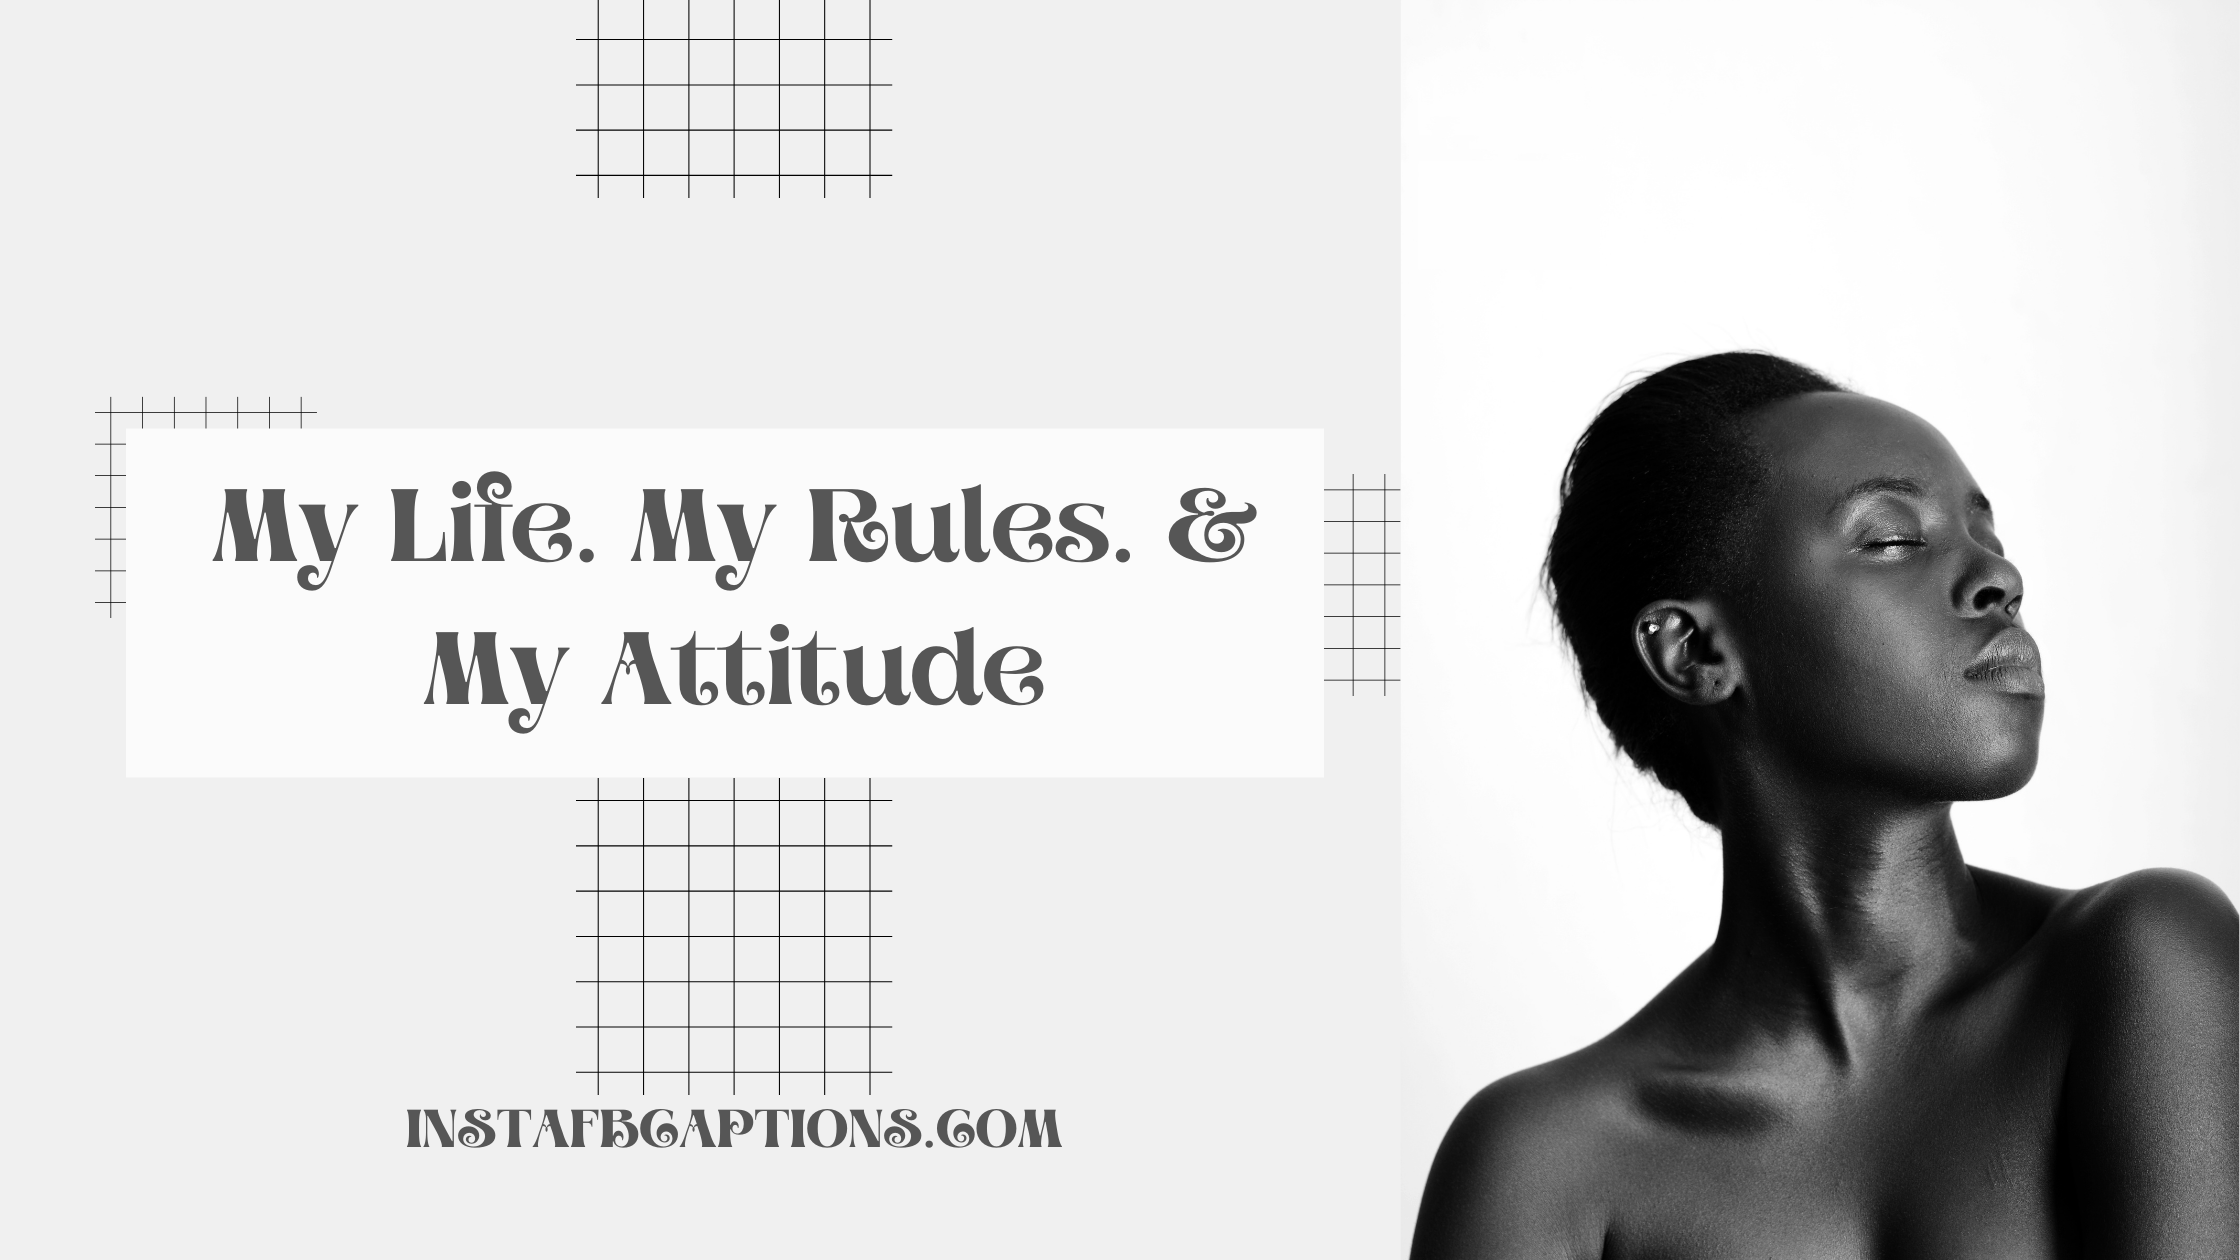 My Life. My Rules. & My Attitude  - Attitude captions for girls - [New] Attitude Captions for Boys Girls Instagram Posts in 2023